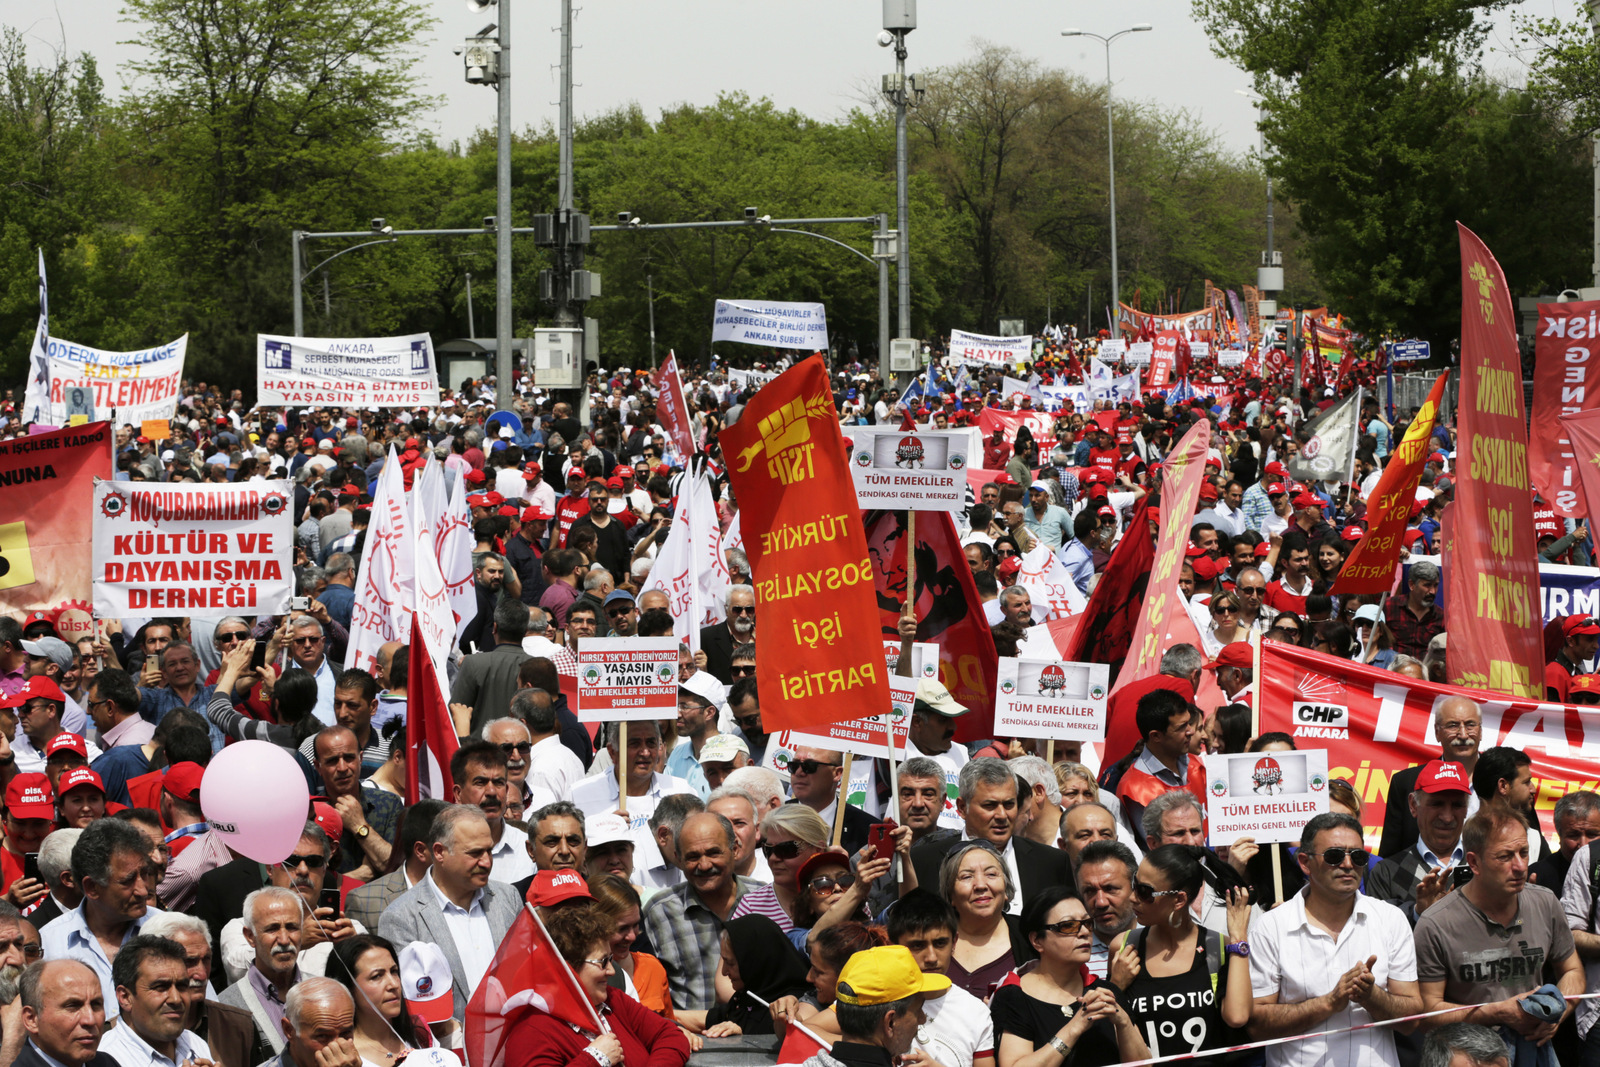 Protesters hold banners during a May day protest in Ankara, Turkey , Monday, May 1, 2017. Workers and activists marked May Day with defiant rallies and marches for better pay and working conditions Monday. 